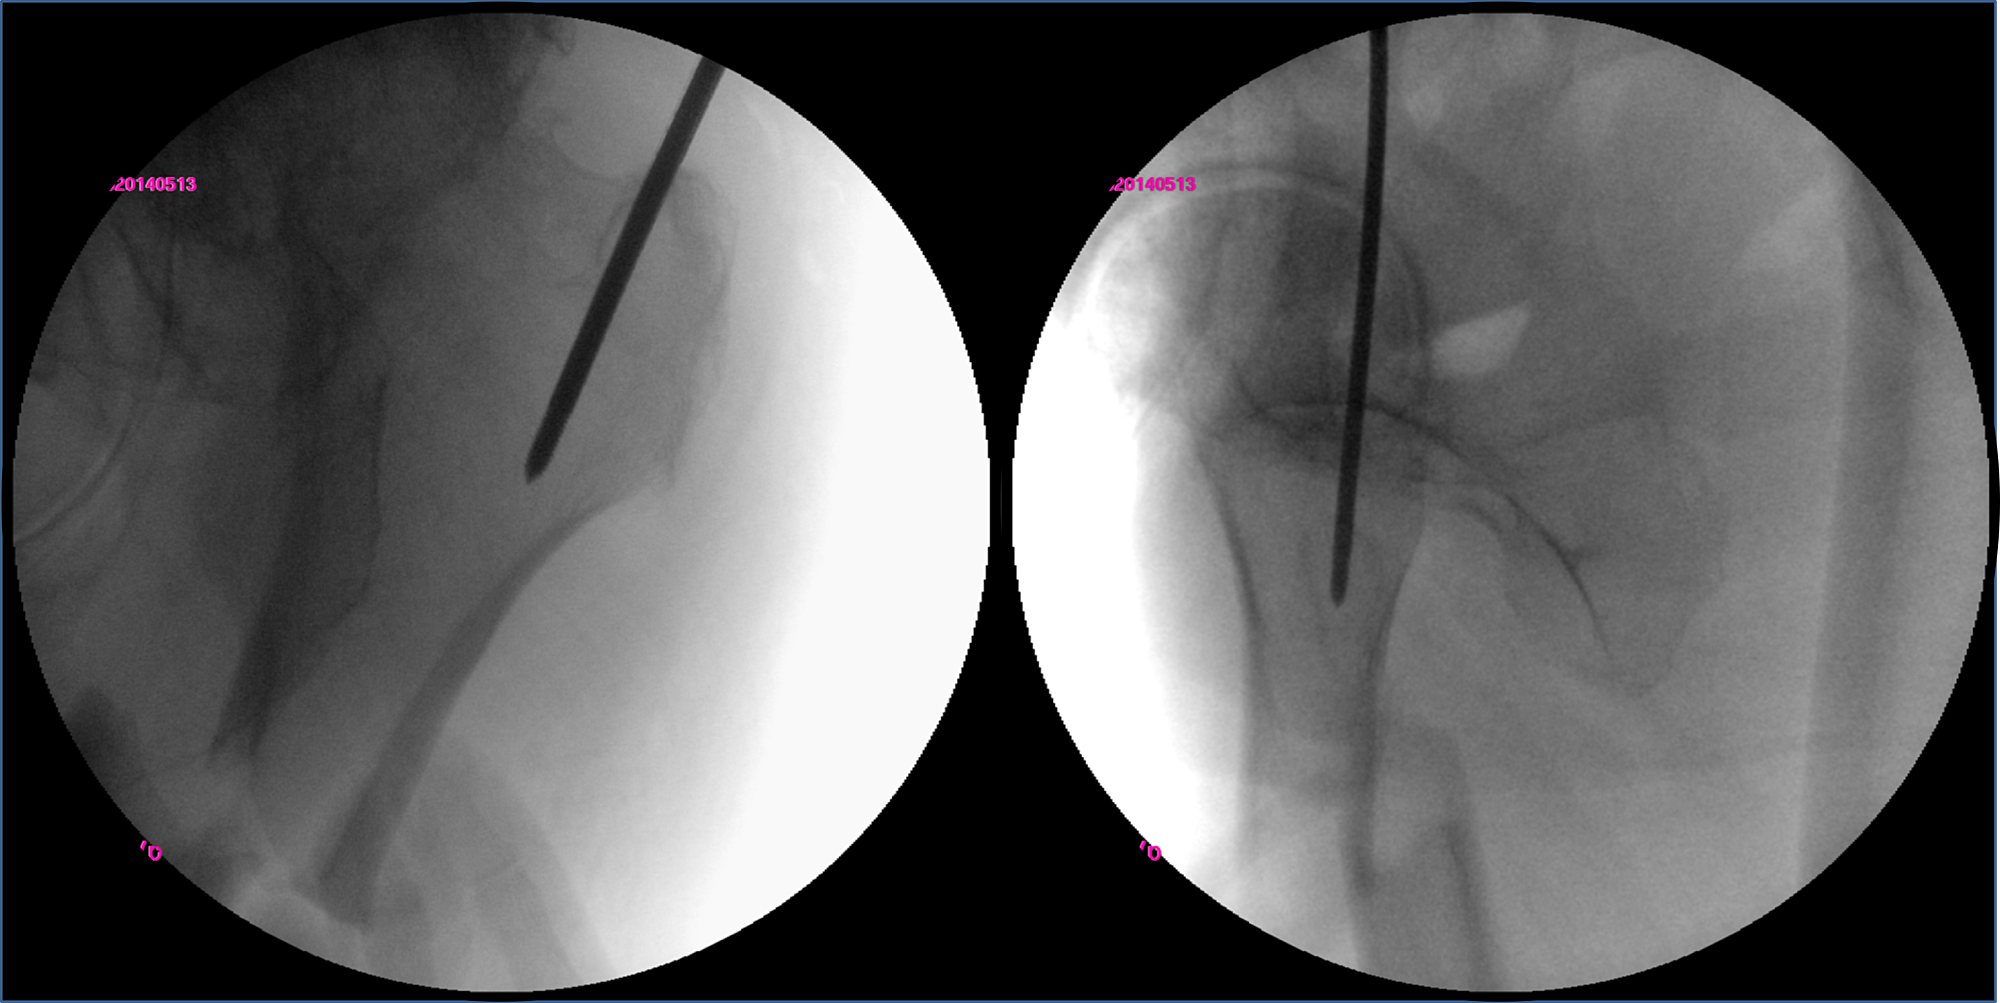 Cureus | Subtrochanteric Fracture of the Femur Accompanying Pre-existing  Ipsilateral Osteoarthritis of the Hip Successfully Treated with Intramedullary  Nailing in the Lateral Decubitus Position: A Case Report | Article